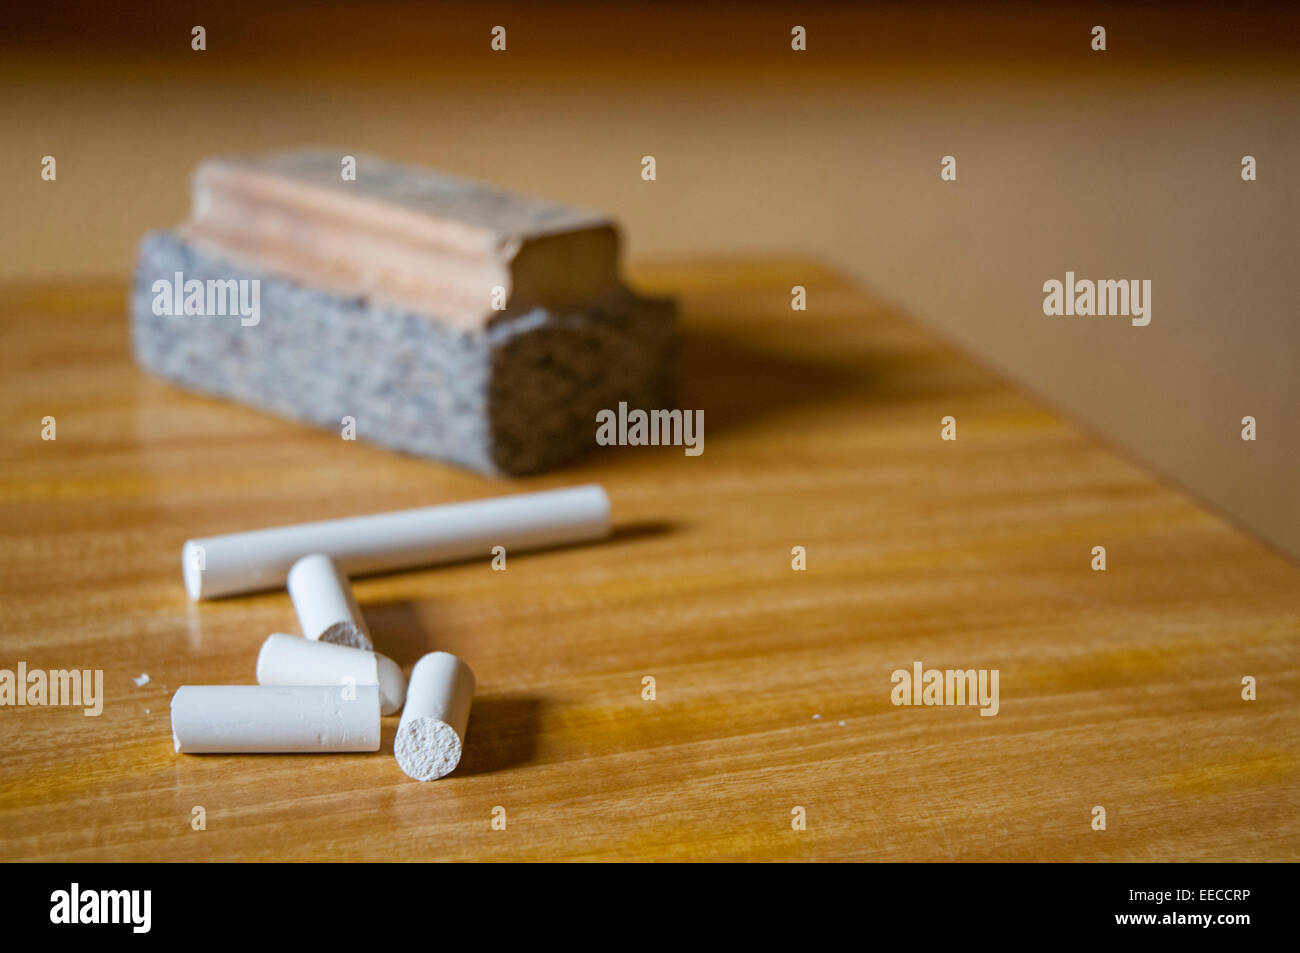 Chalks and board rubber on teacher's table. Close view. Stock Photo